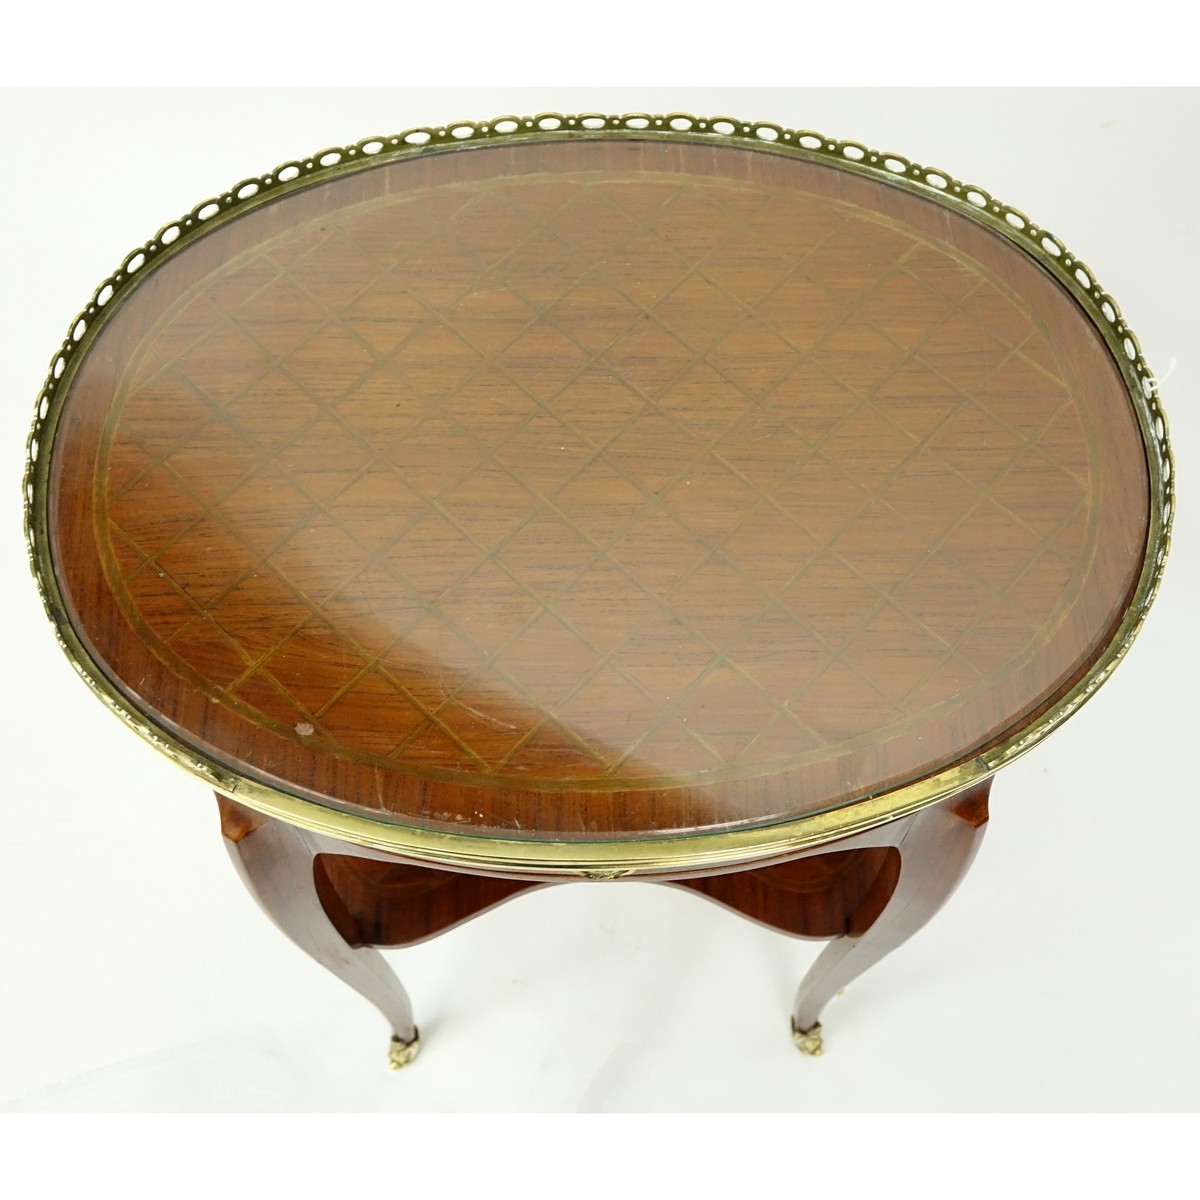 Mid 20th Century Louis XVI style Bronze Mounted Marquetry Inlaid Side Table. Single drawer, oval form.